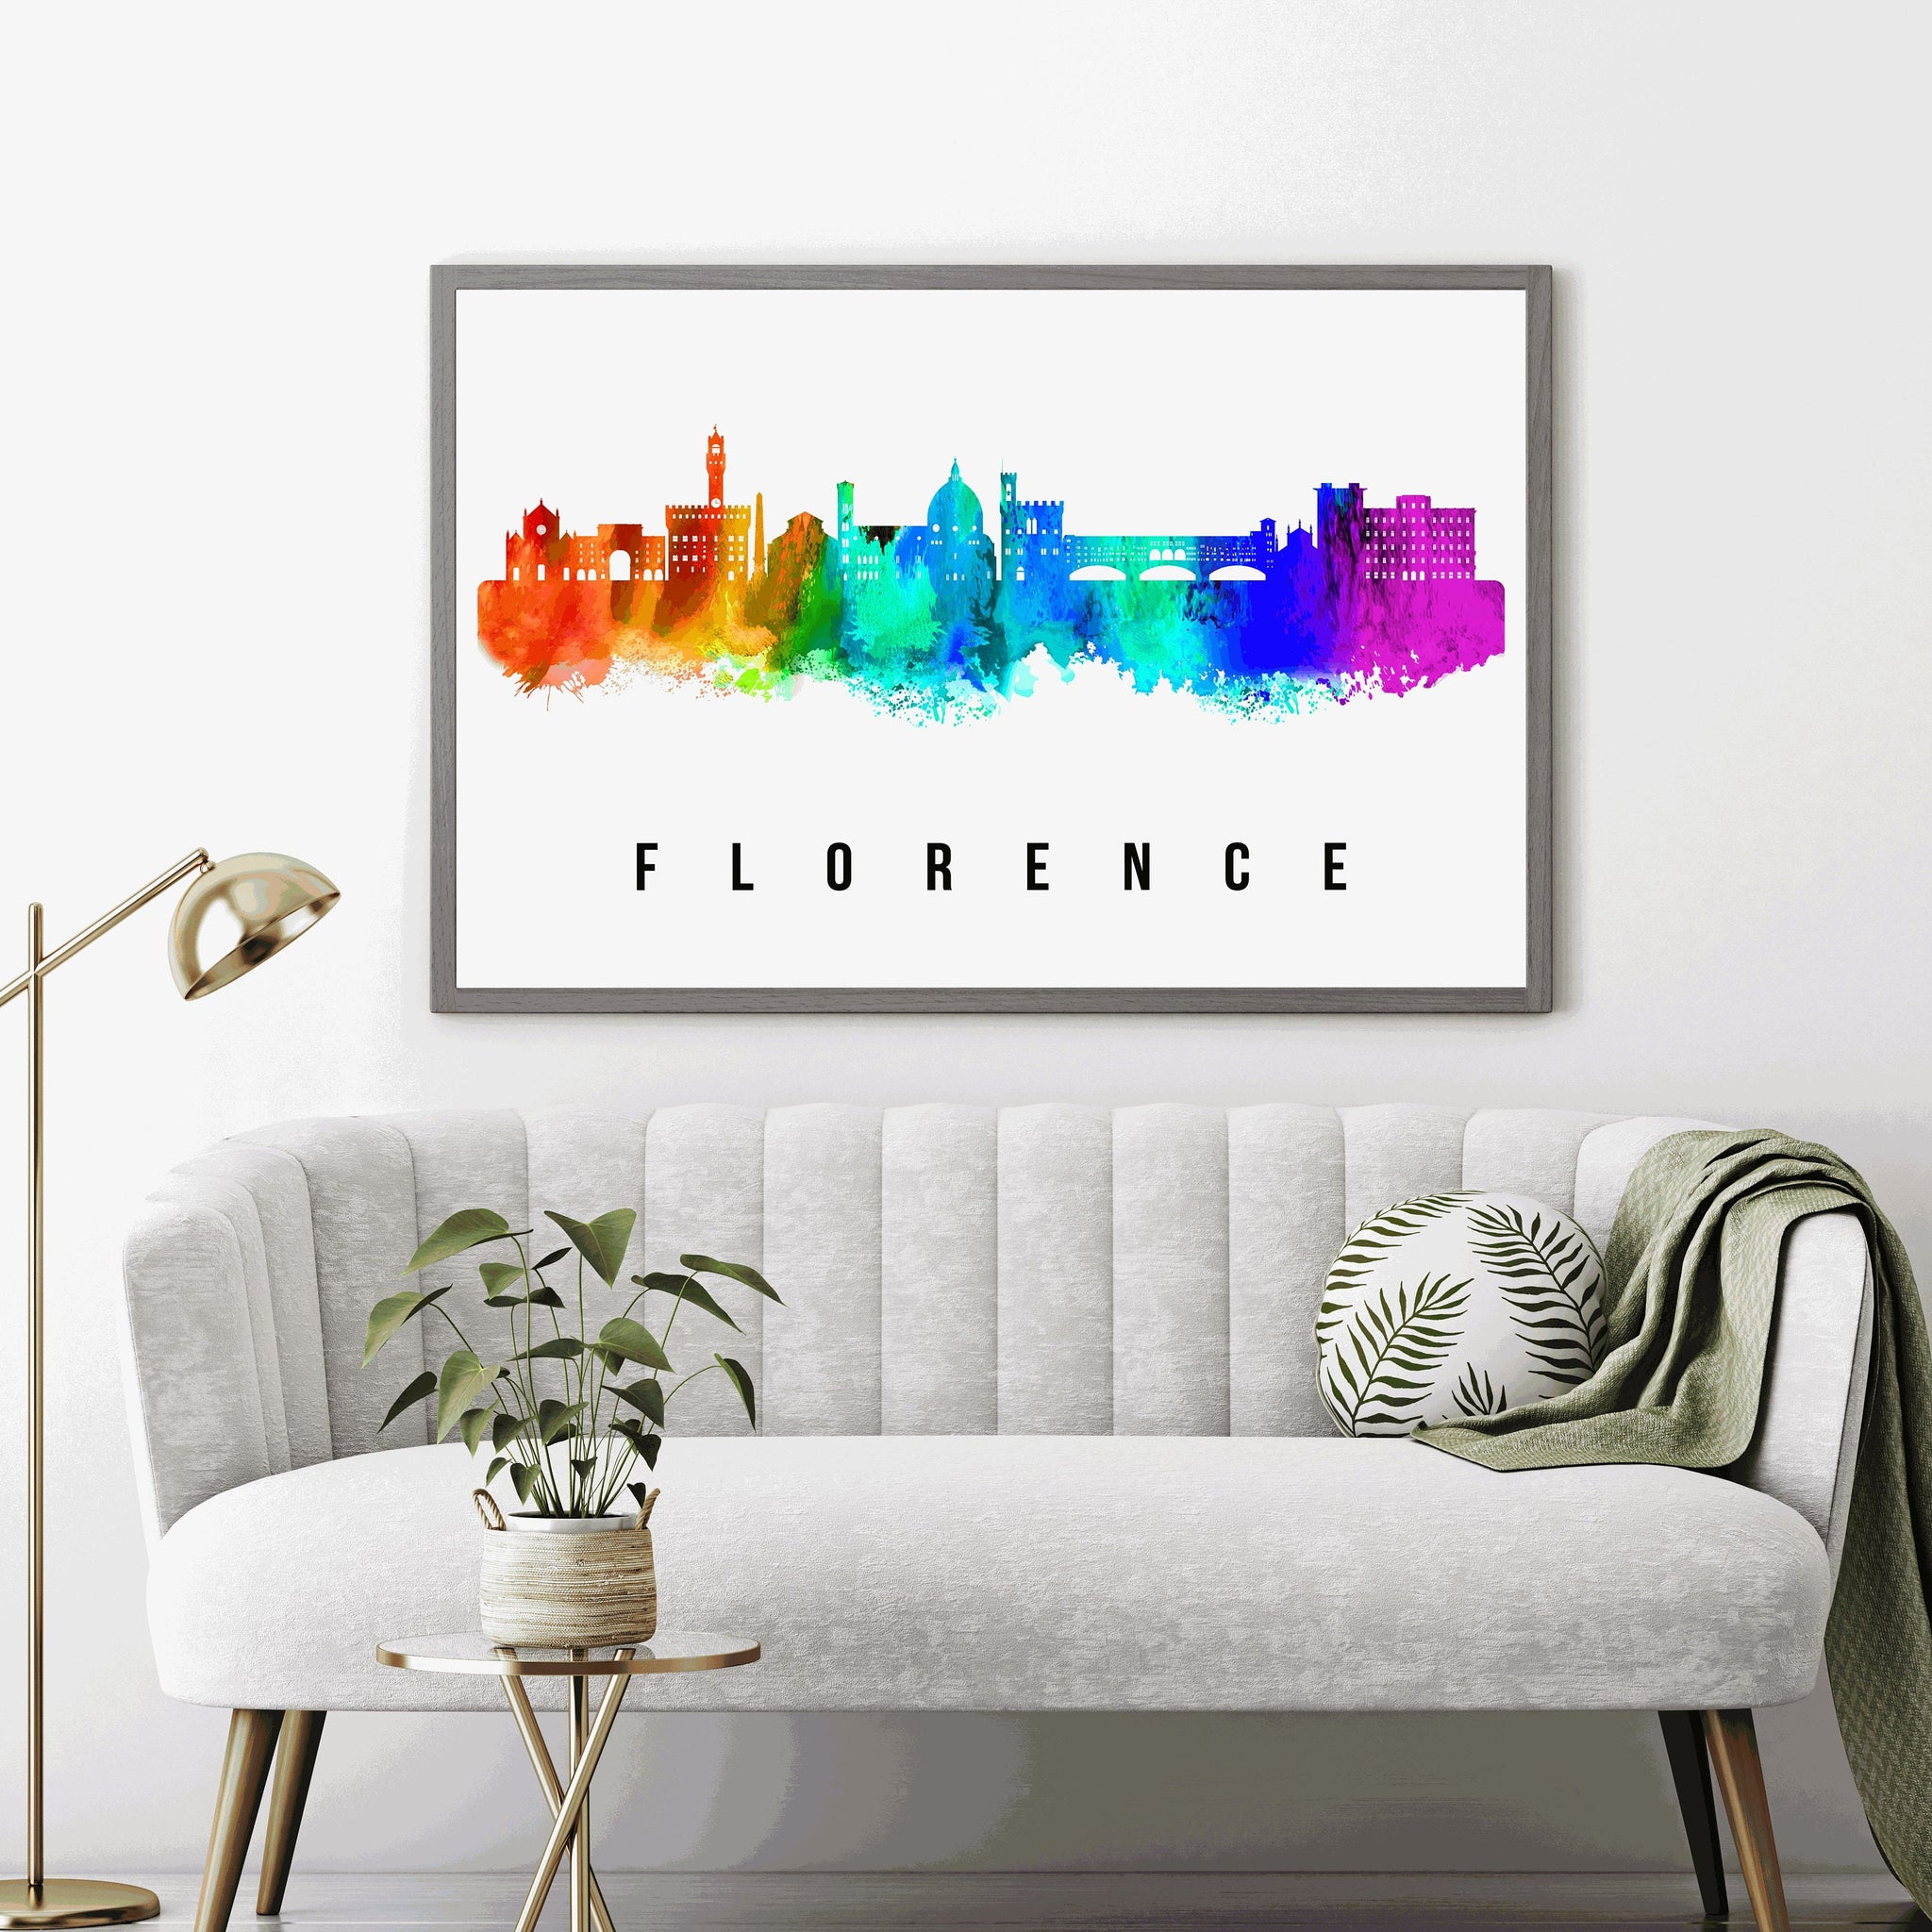 FLORENCE - ITALY Poster, Skyline Poster Cityscape and Landmark Florence City Illustration Home Wall Art, Office Decor